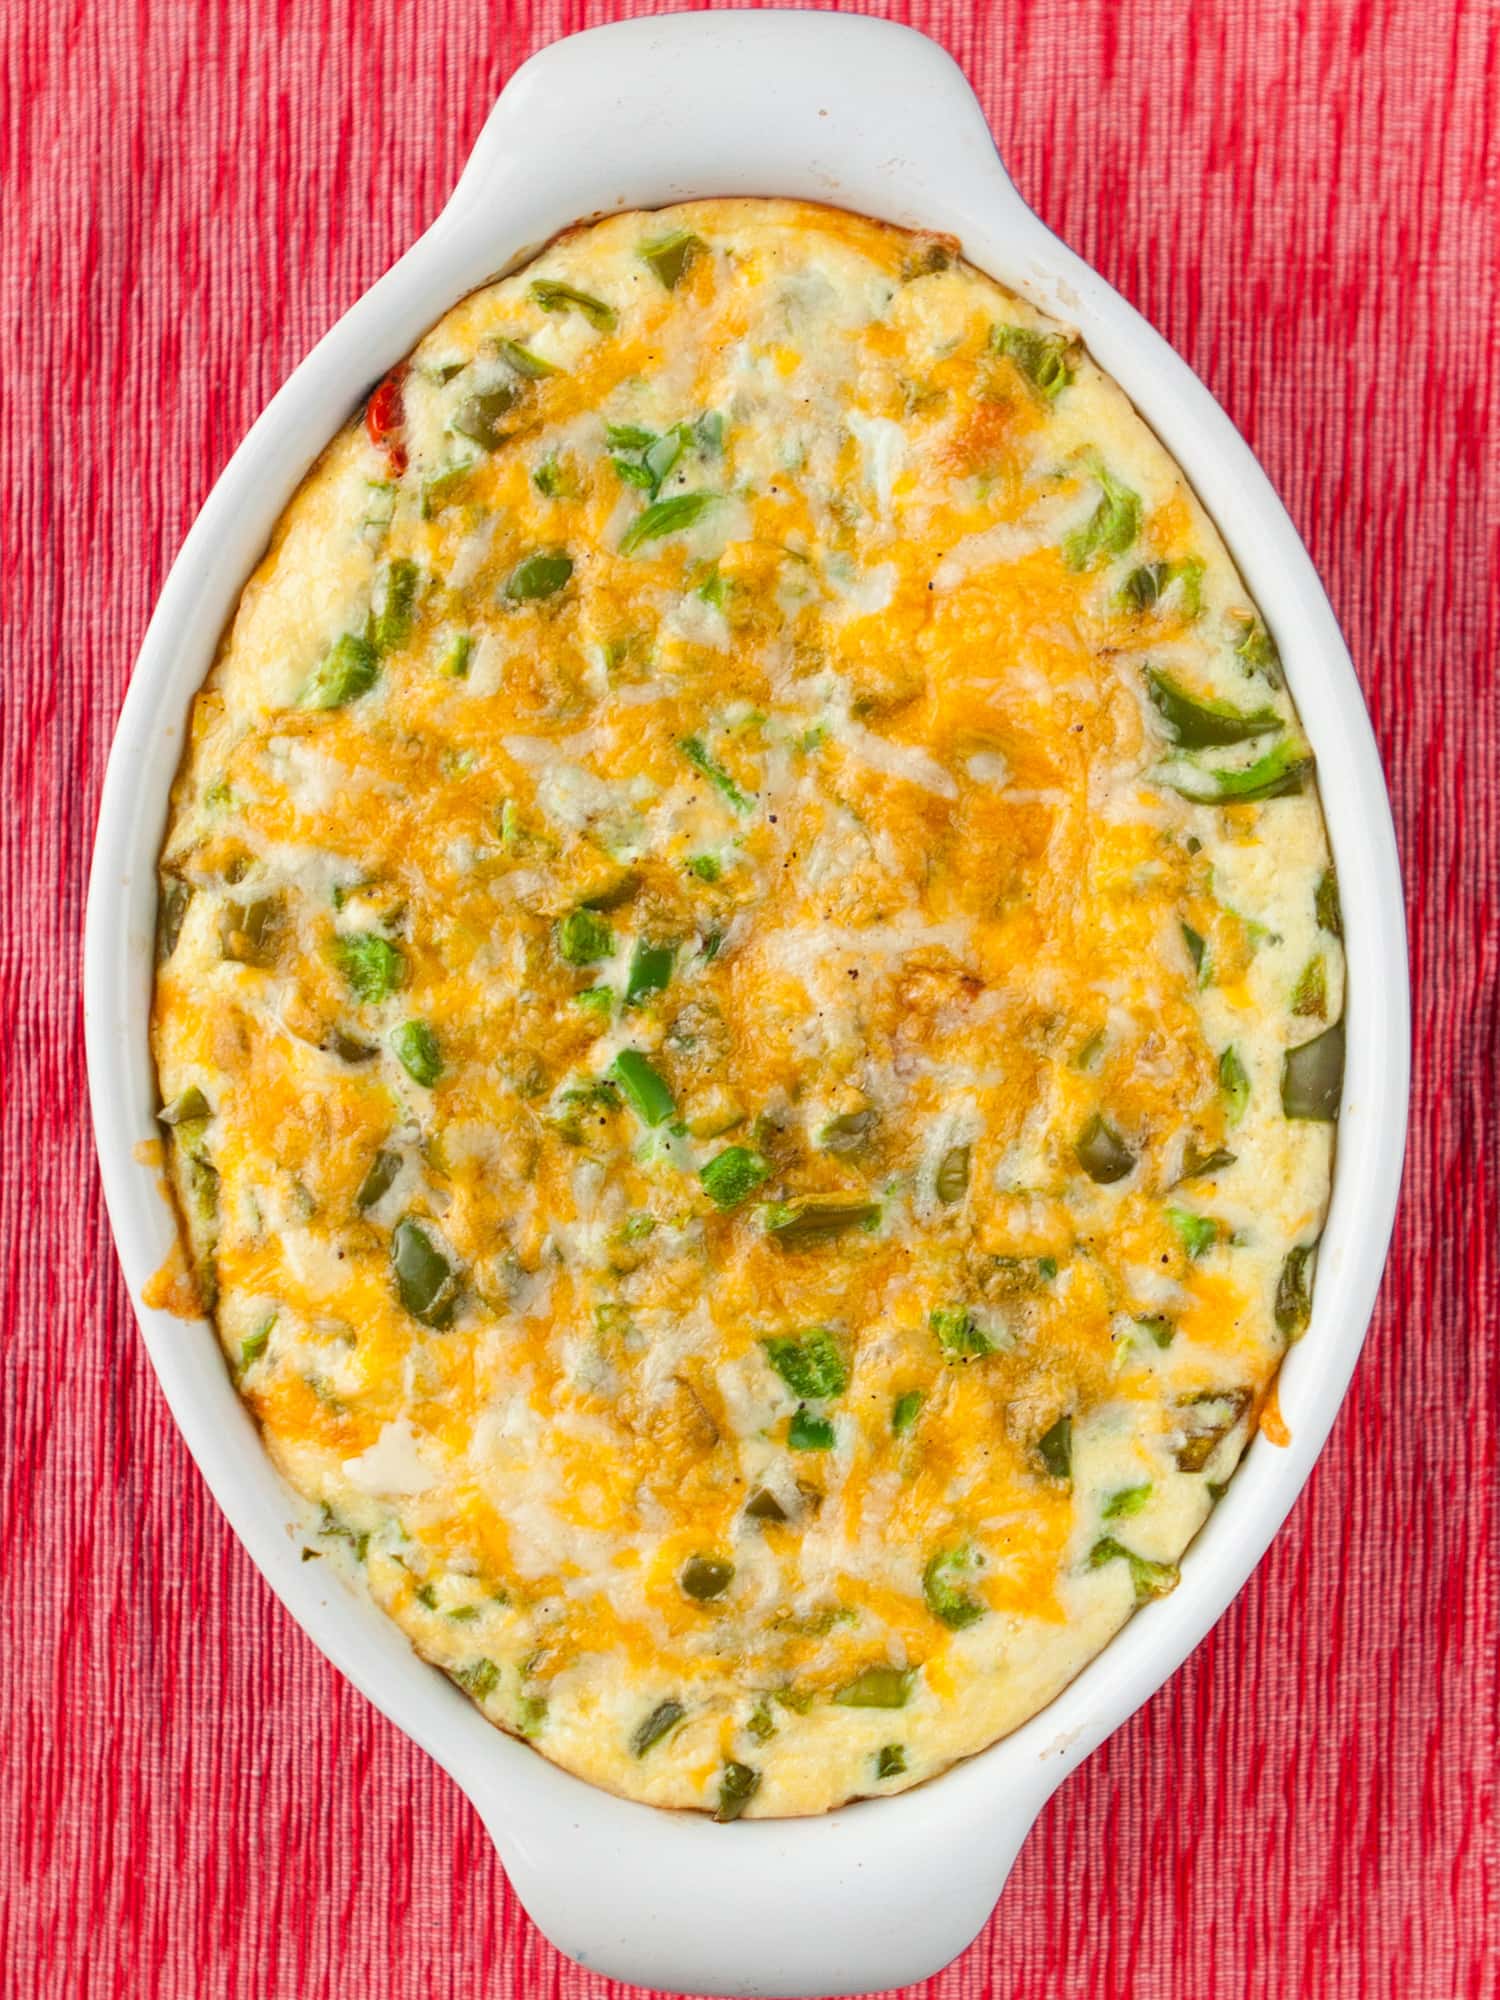 green pepper casserole in baking dish on red table background.